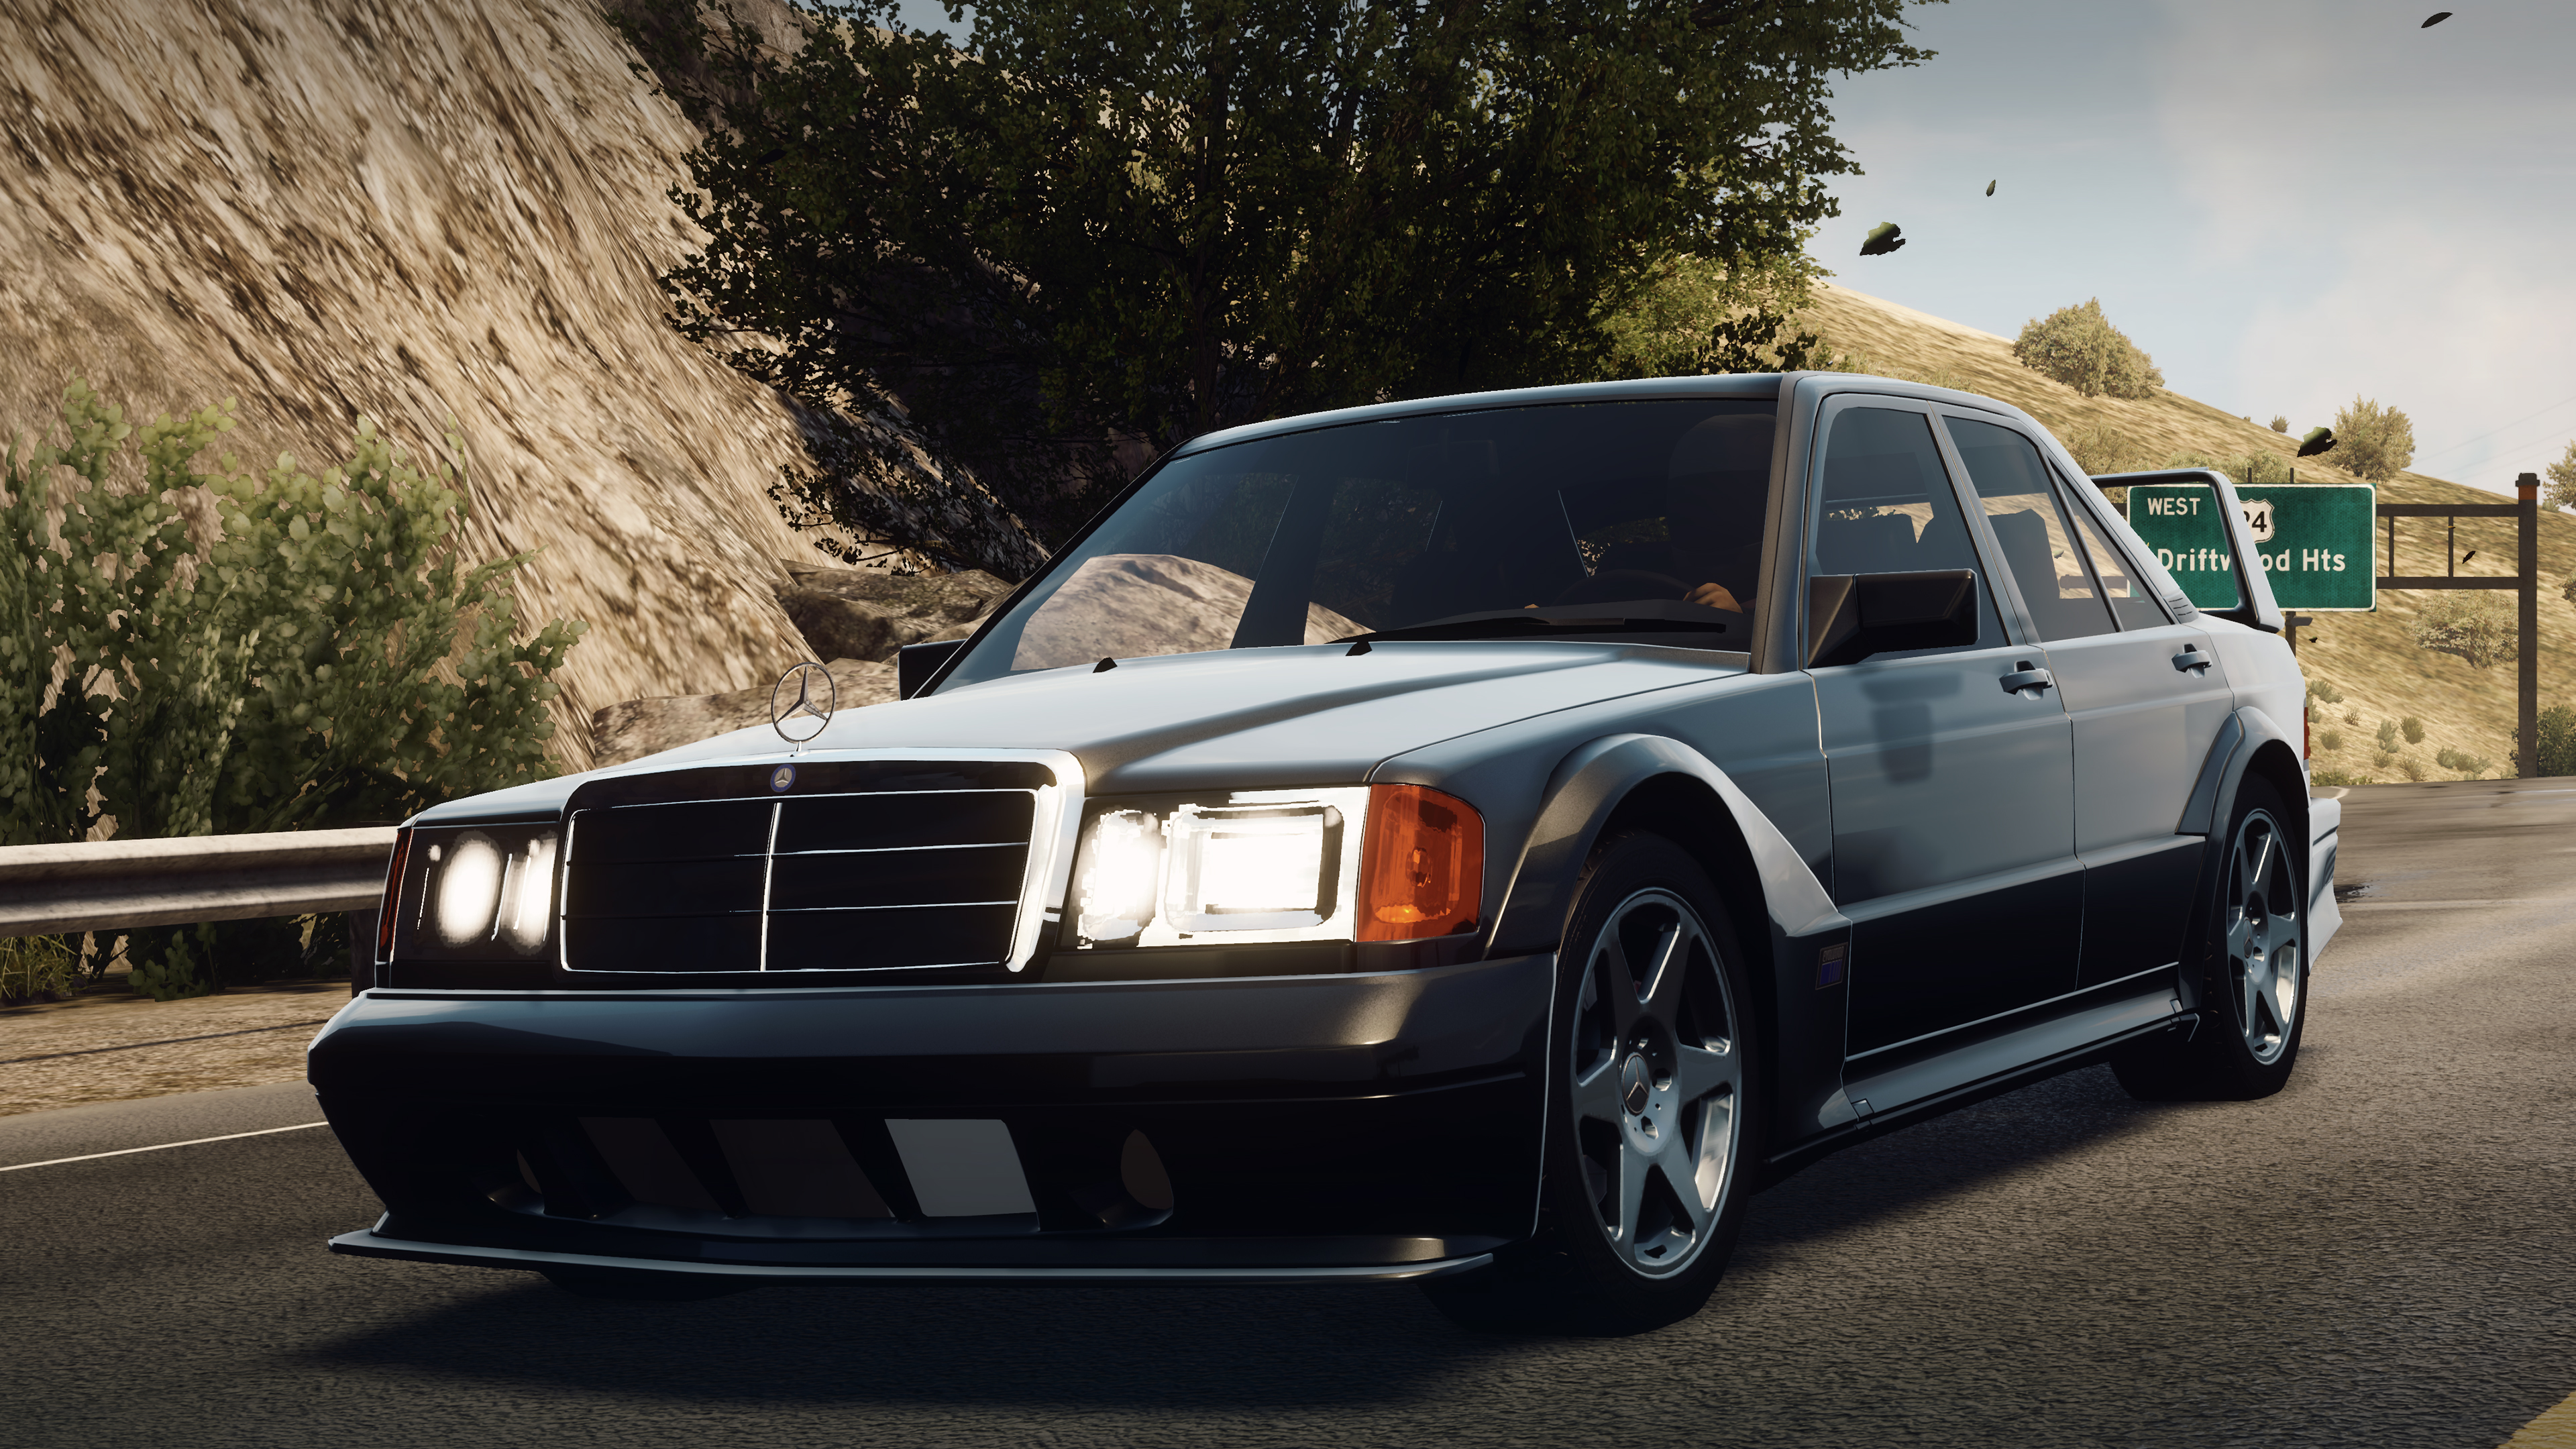 Mercedes-Benz 190E 2.5-16 Evolution II, Need for Speed Wiki